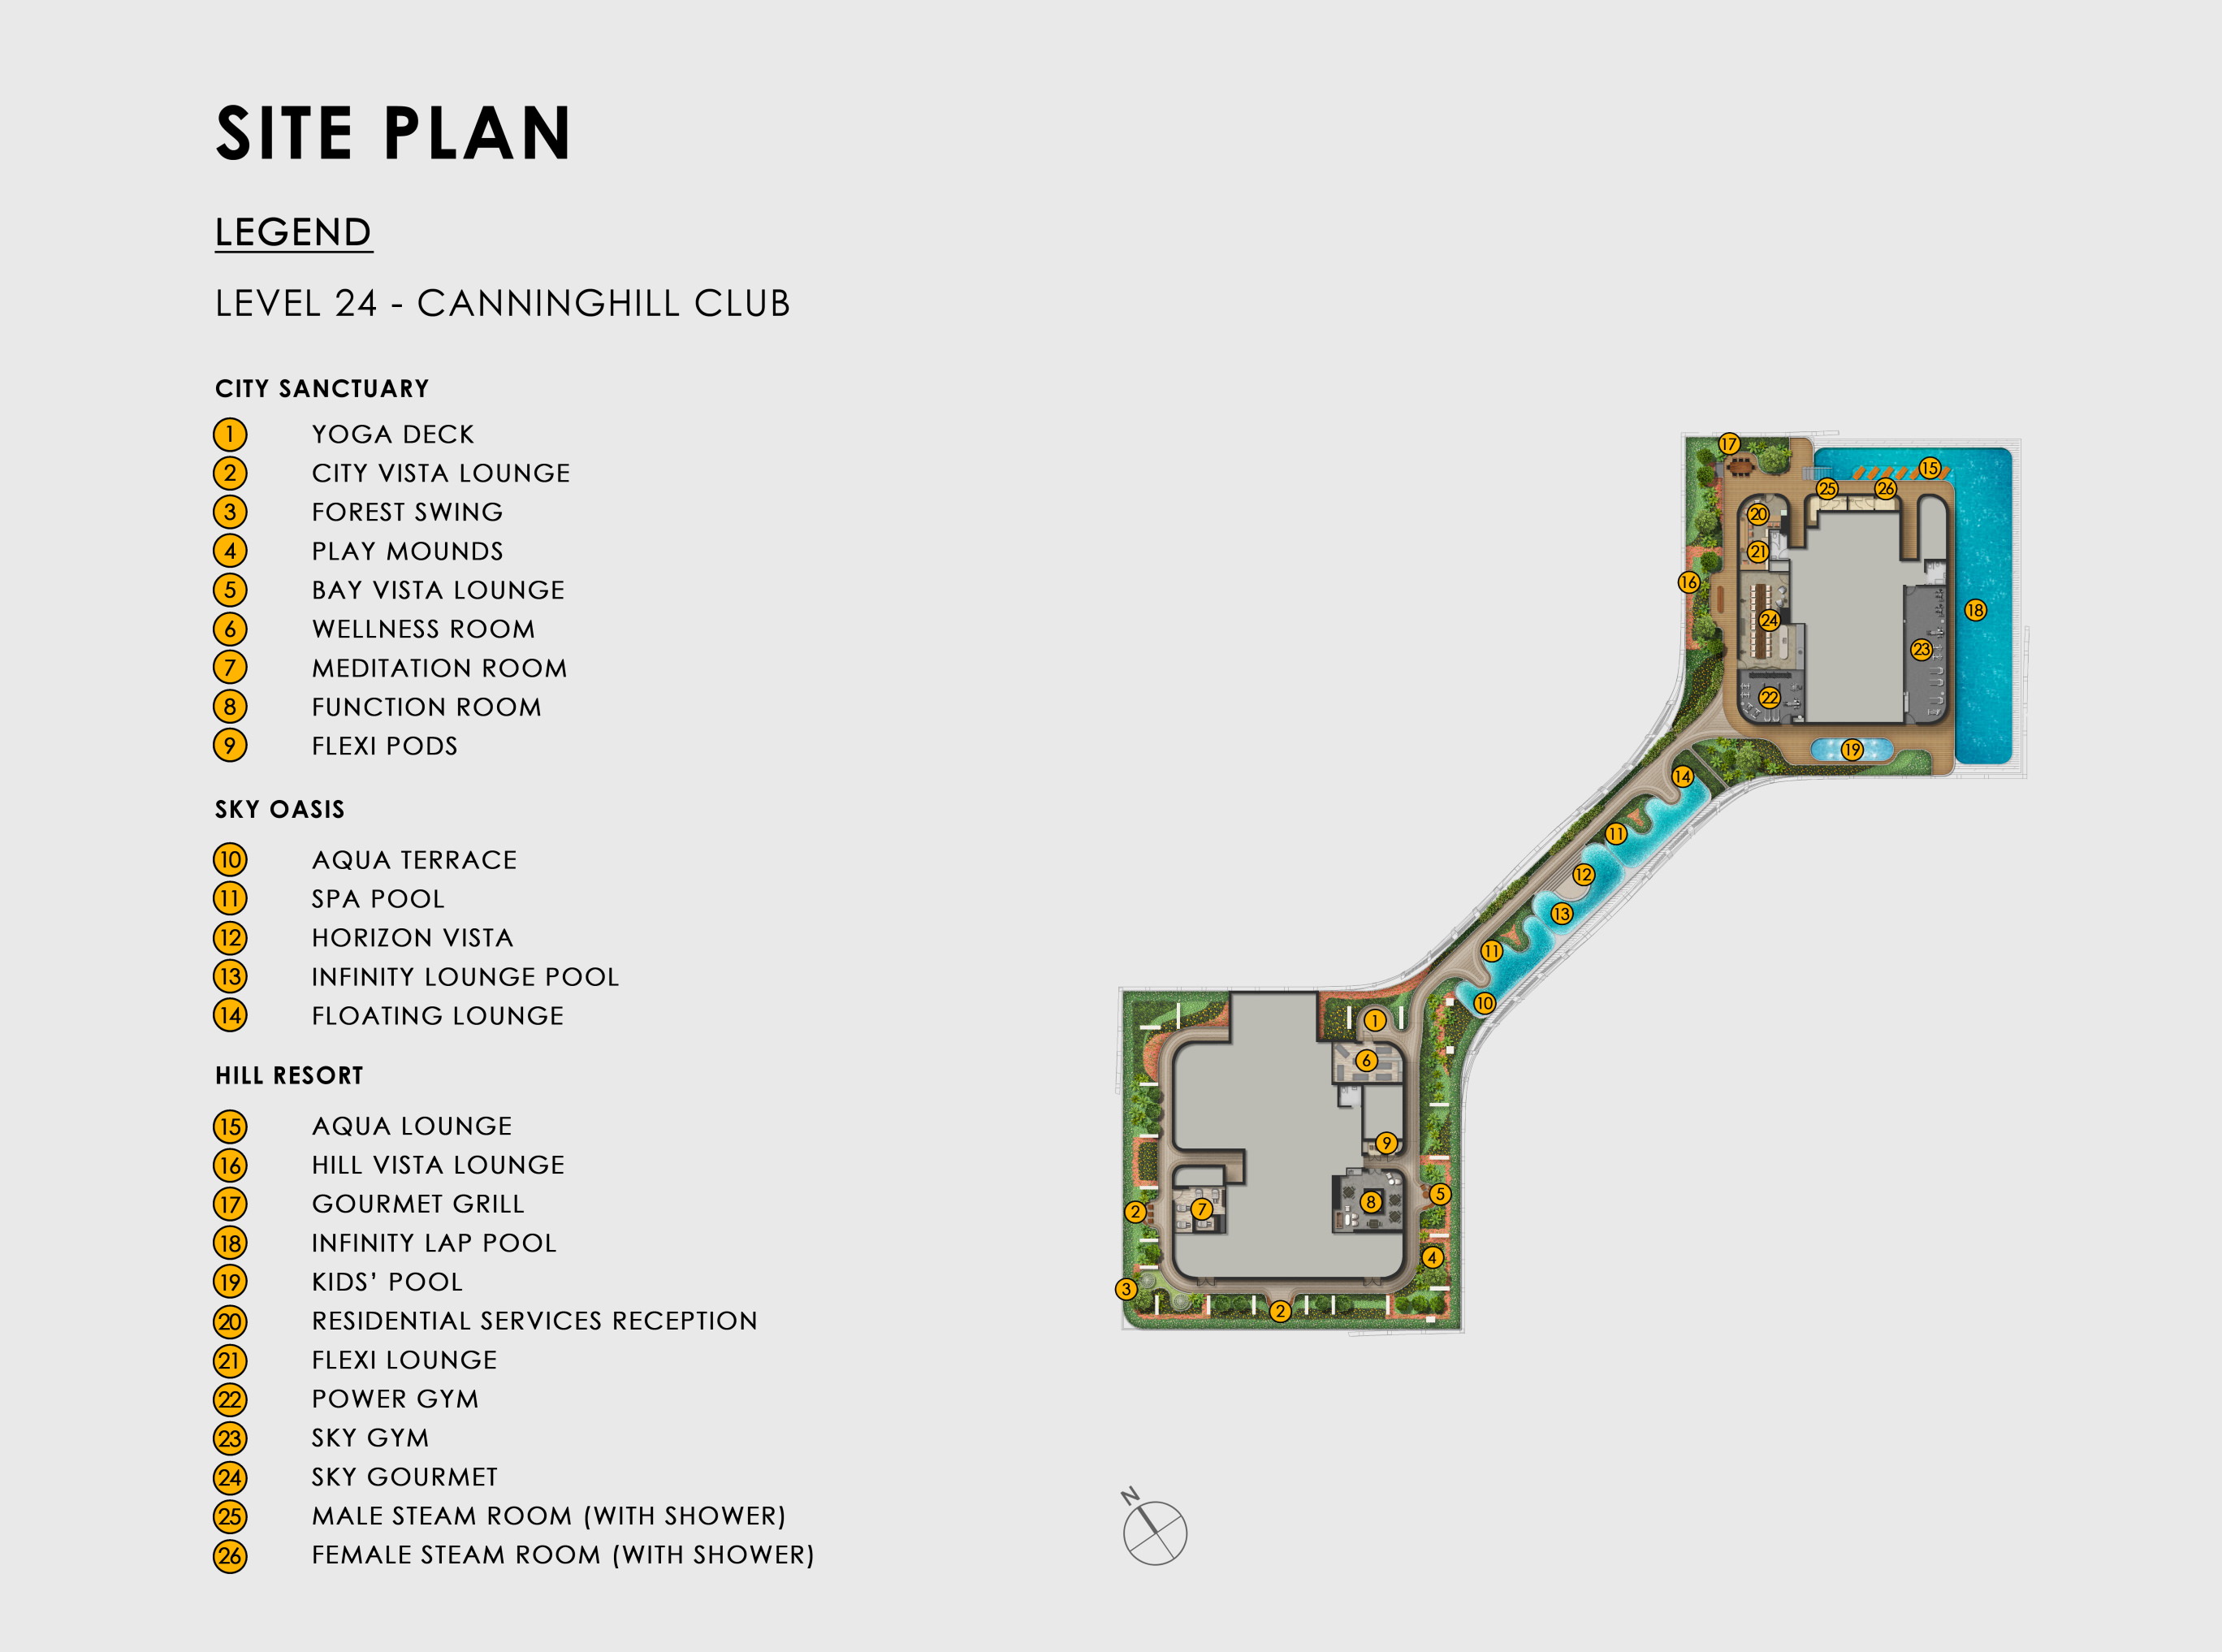 Site Plan 2 (CanningHill Piers)